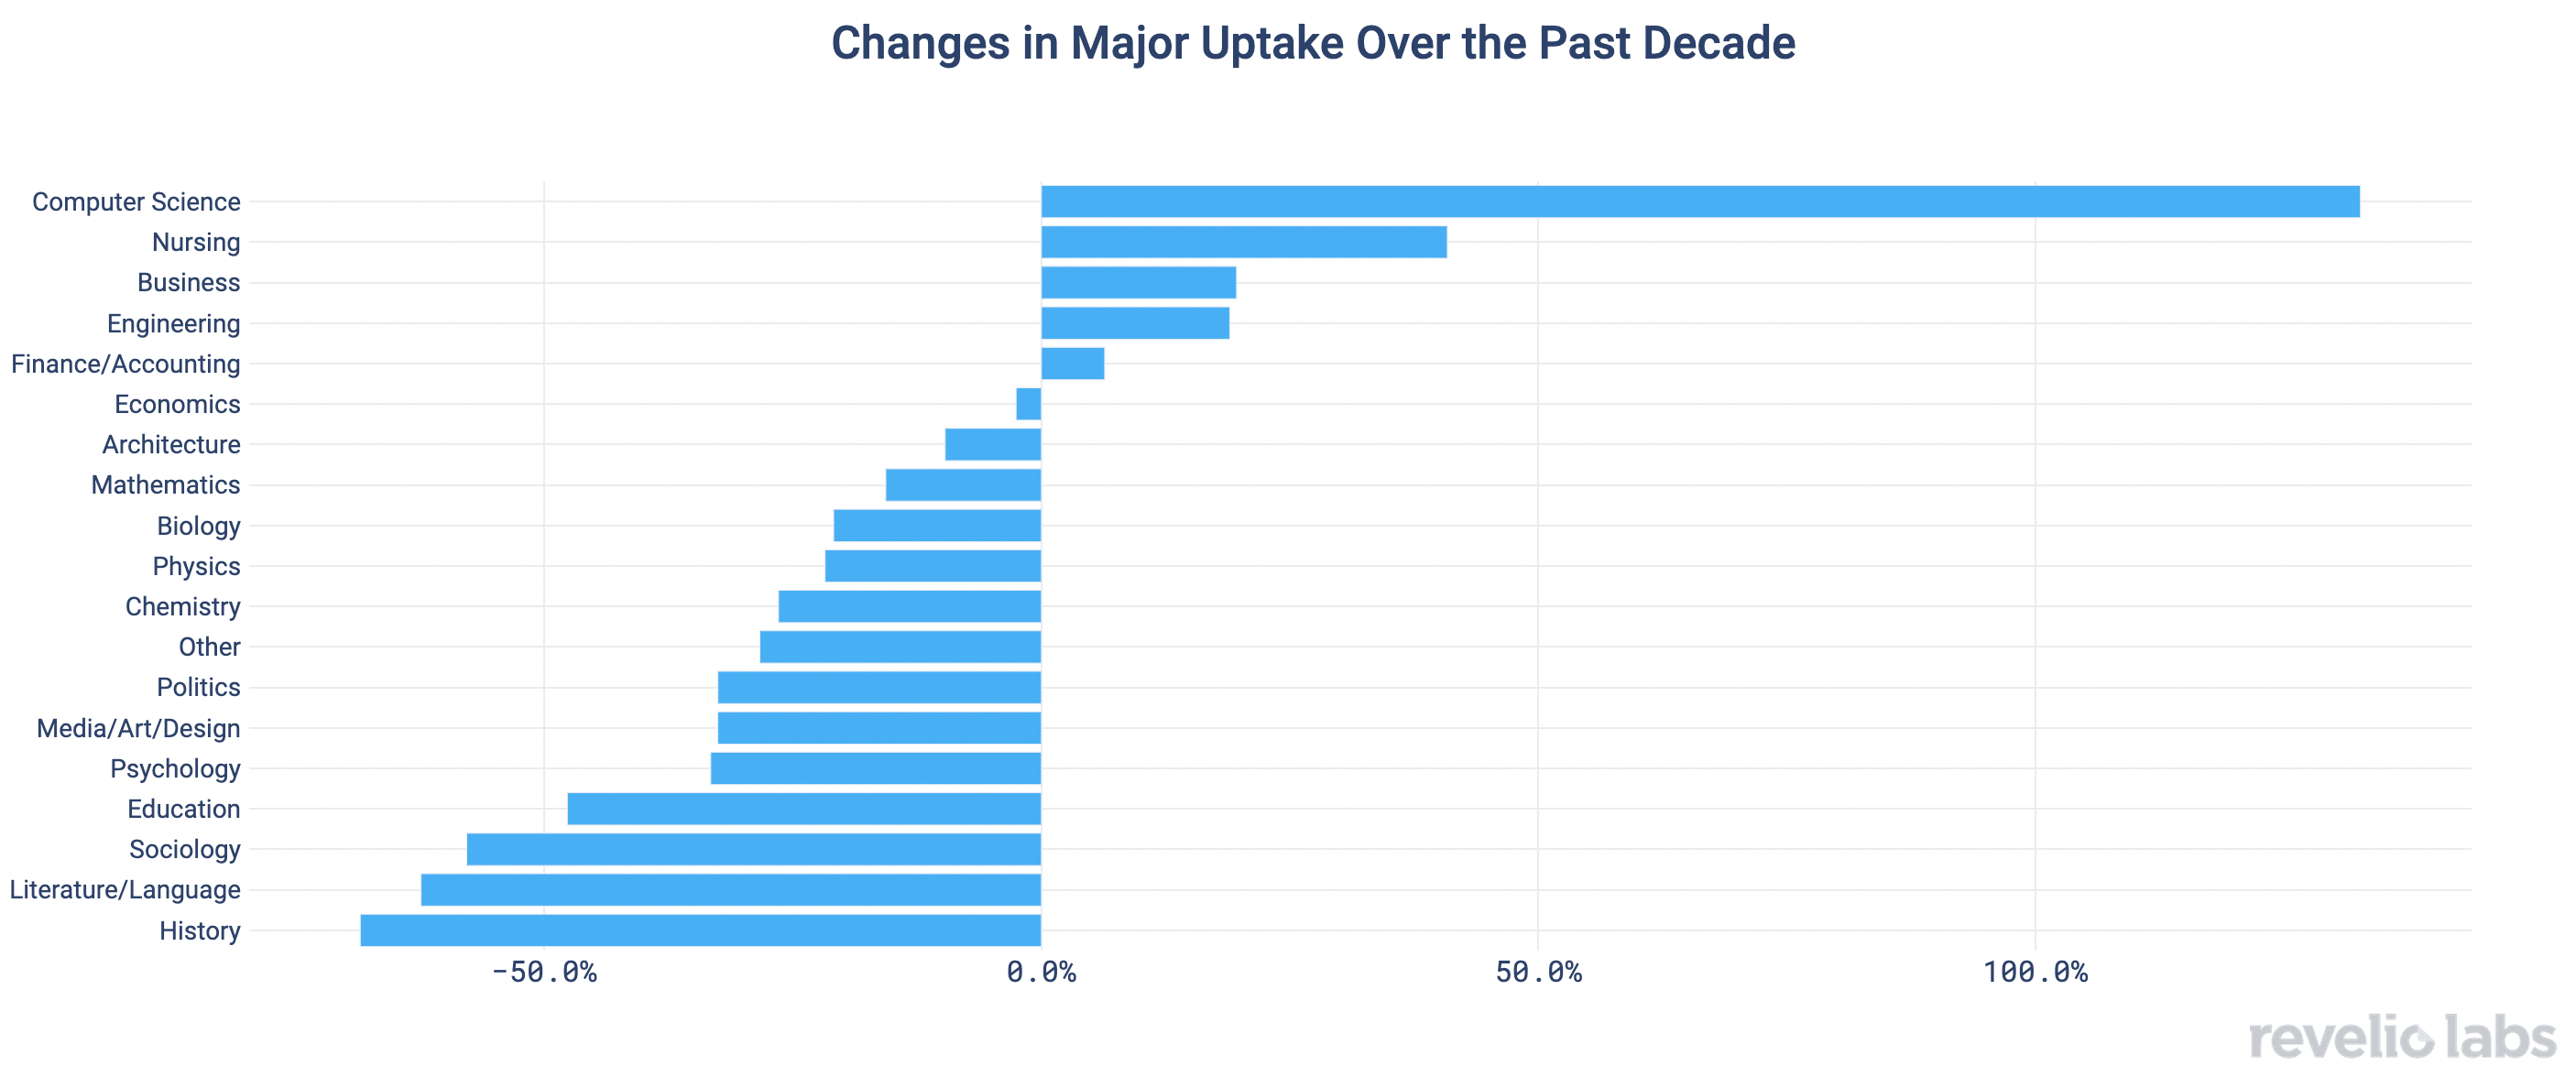 Change in Major Uptake Over the Past Decade